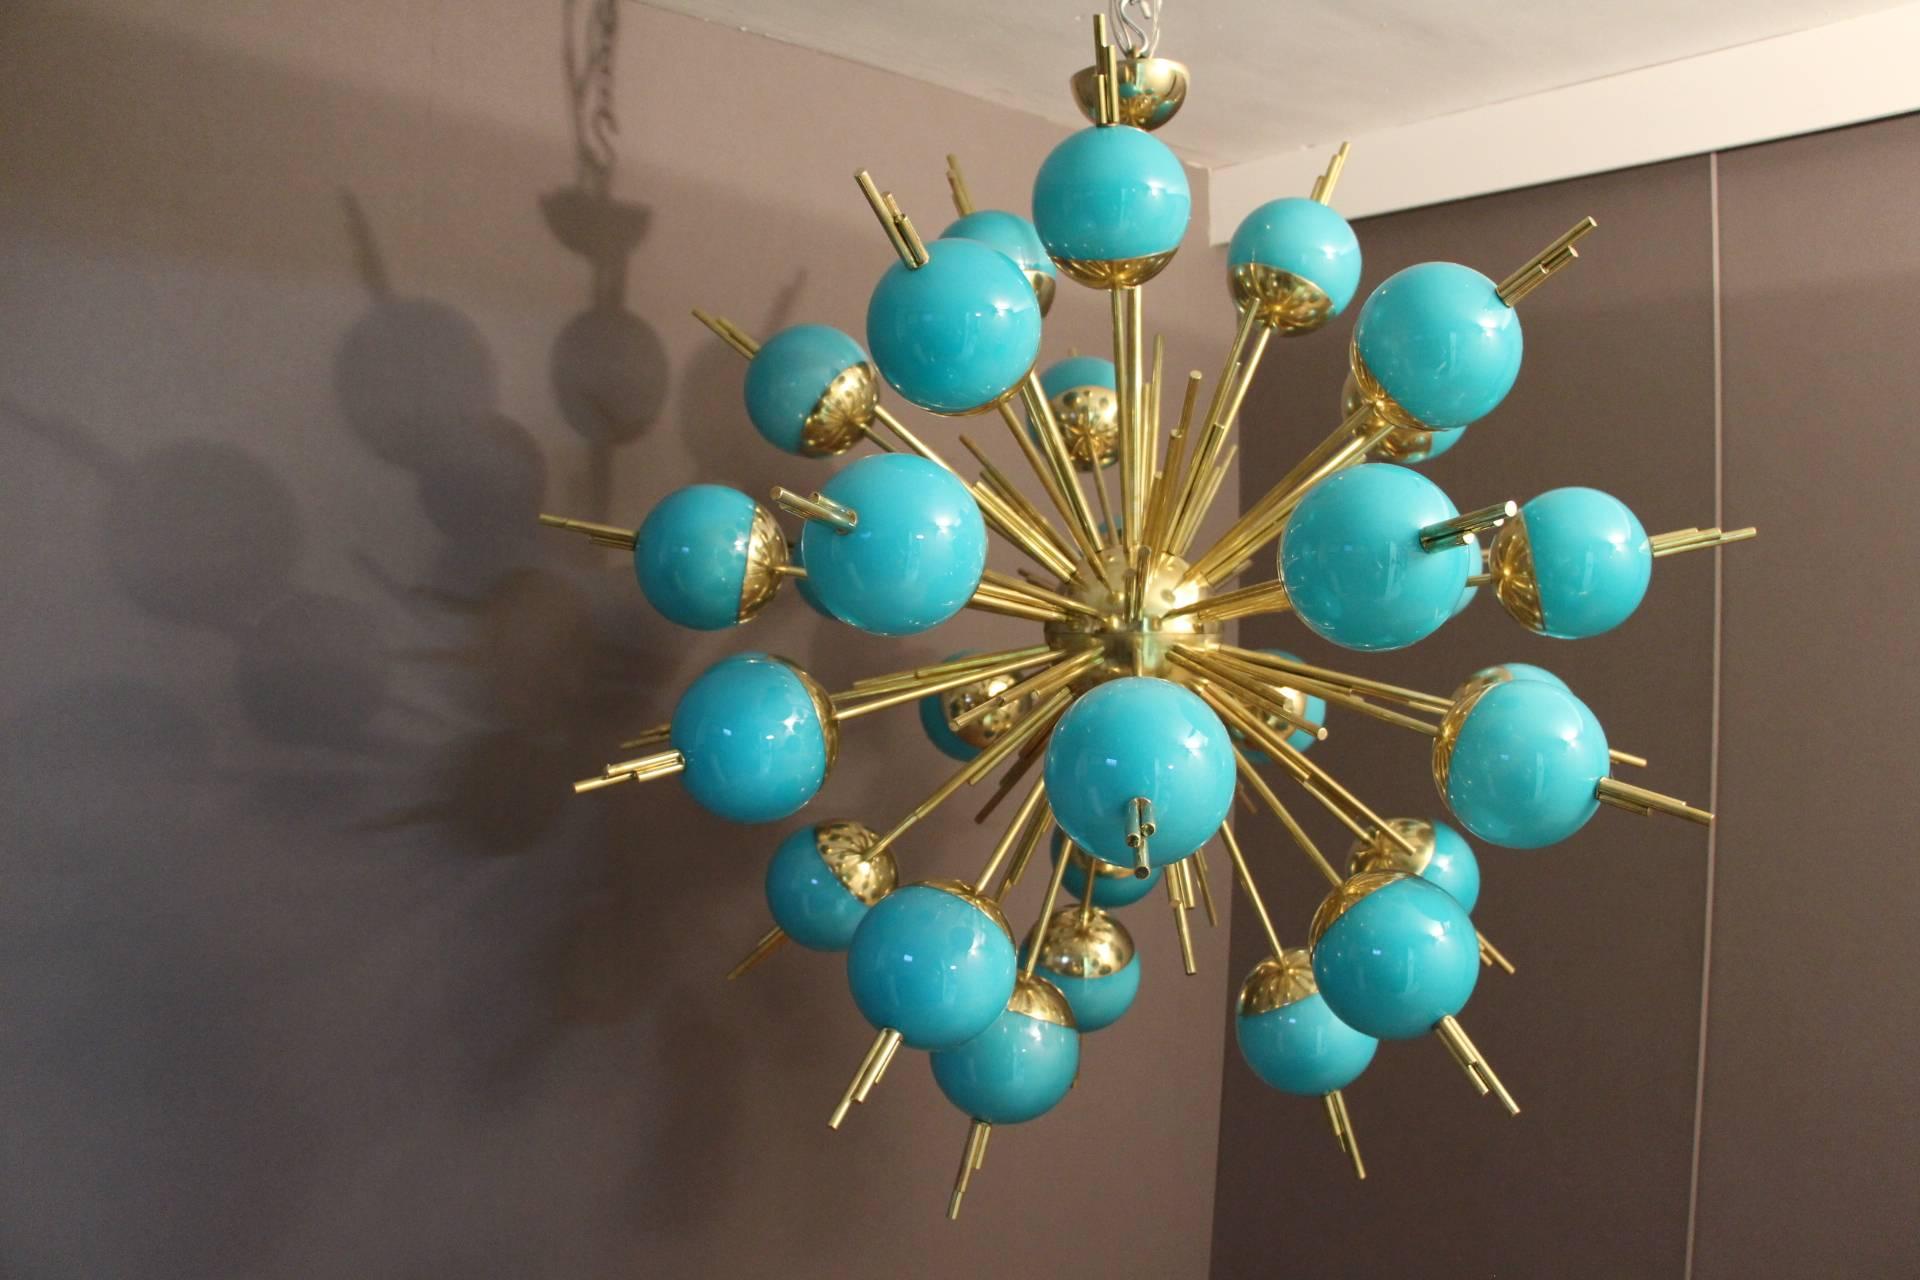 This very unusual Sputnik chandelier features 30 turquoise glass globes mounted on brass rods.
When the light is on, its turquoise globes turn to light blue color and it is still magnificent.
Takes E14 bulbs. Wired for U.S.
Currently, its total